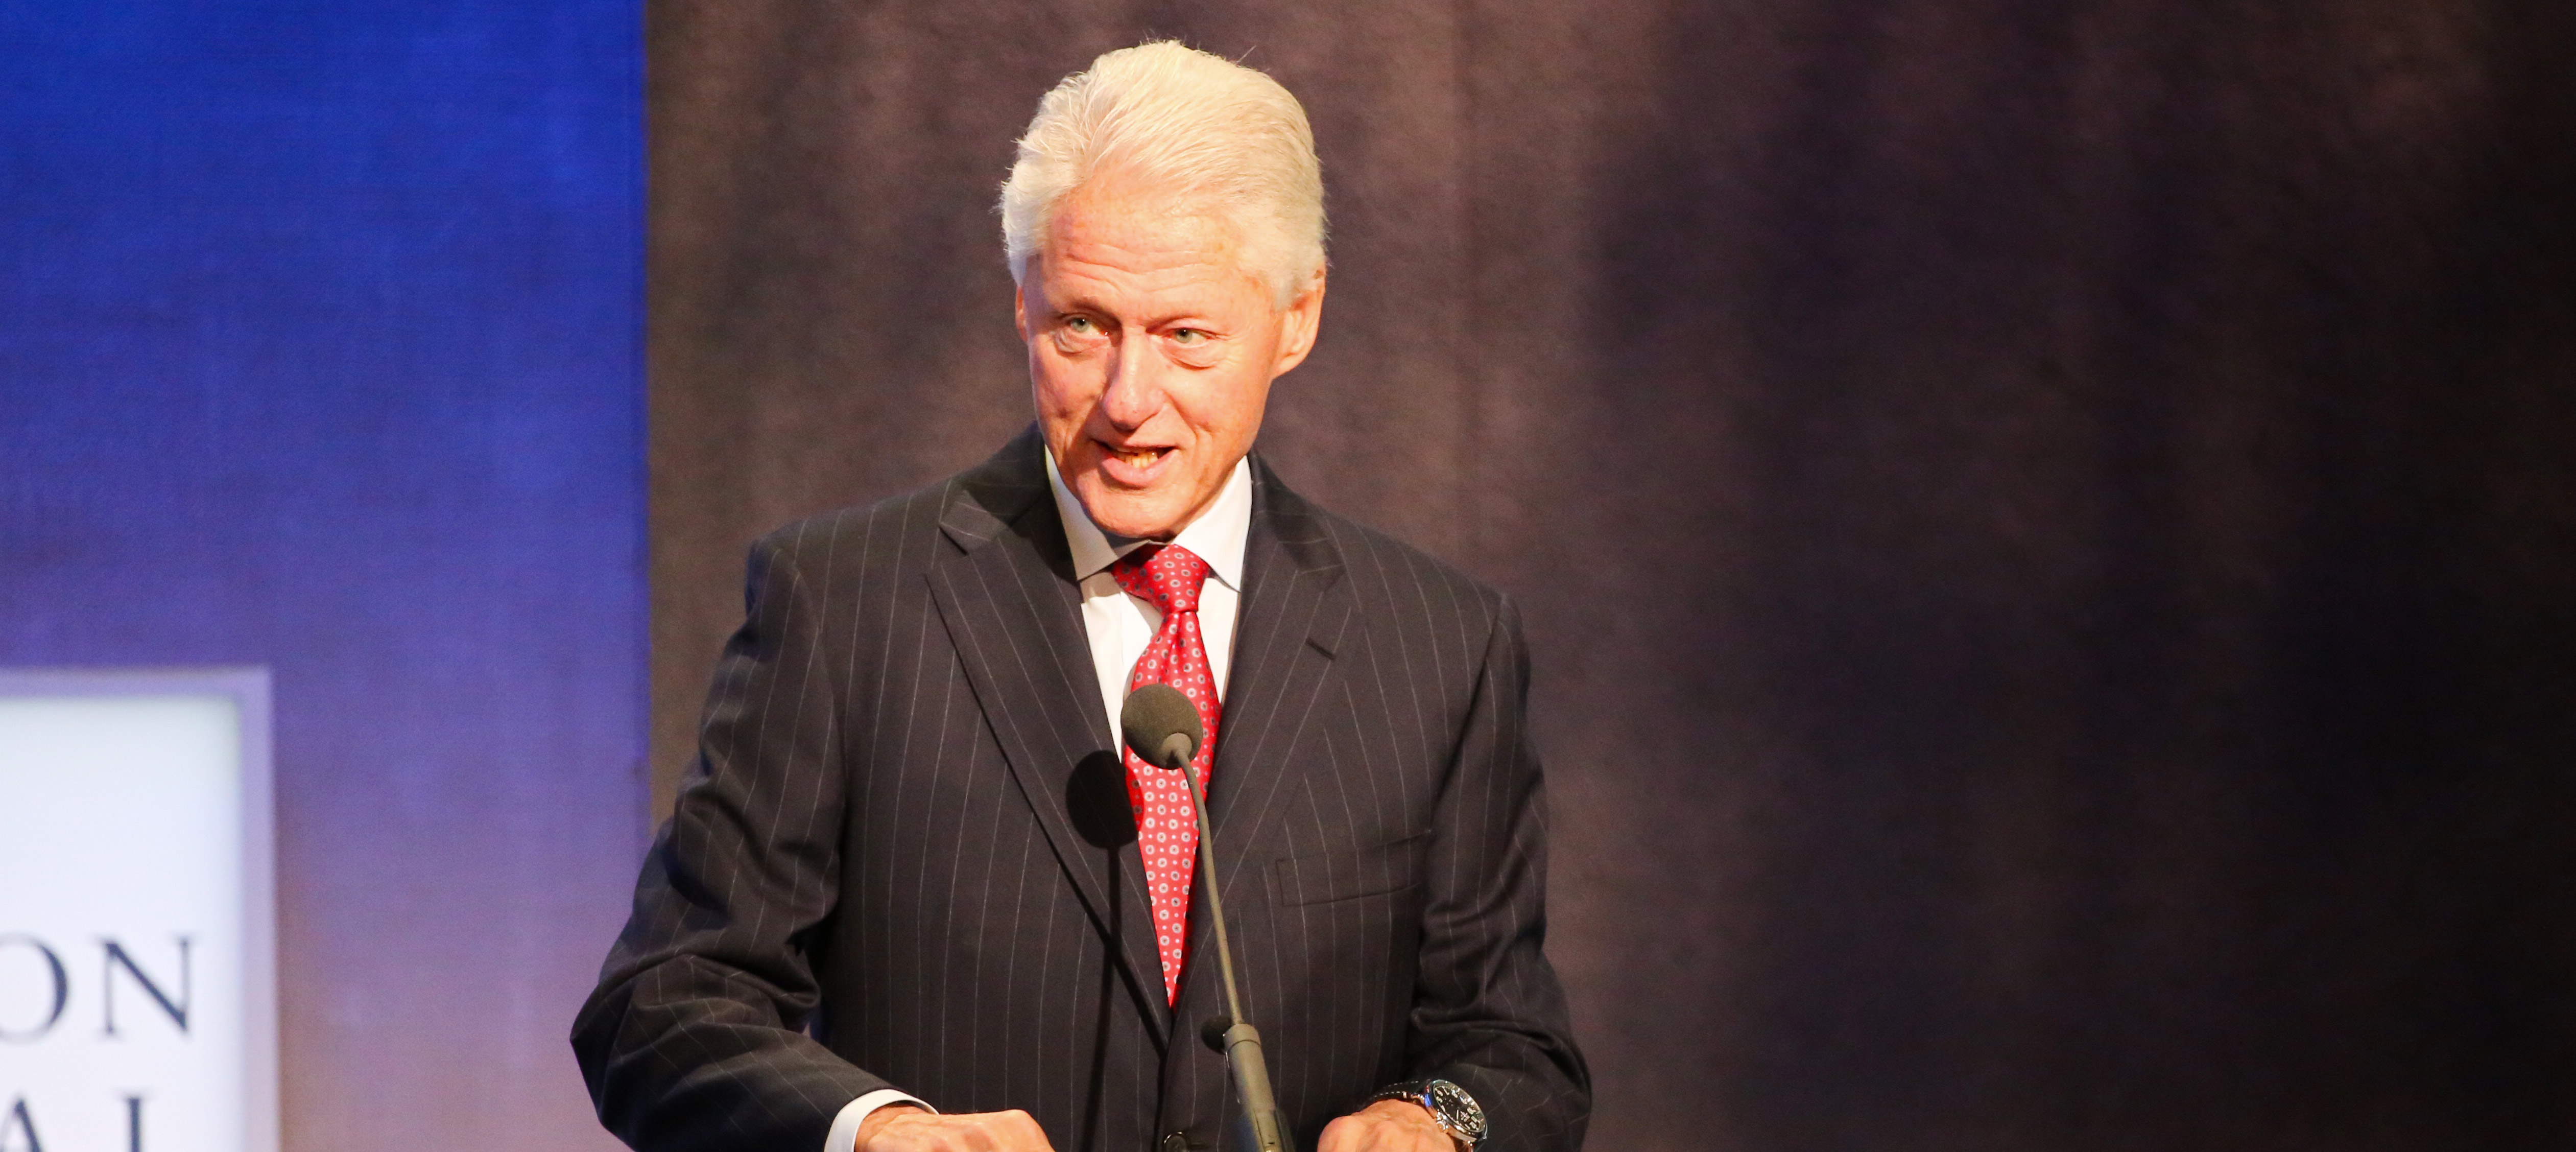 President Bill Clinton is Right to Demand Excellence From Charter Schools